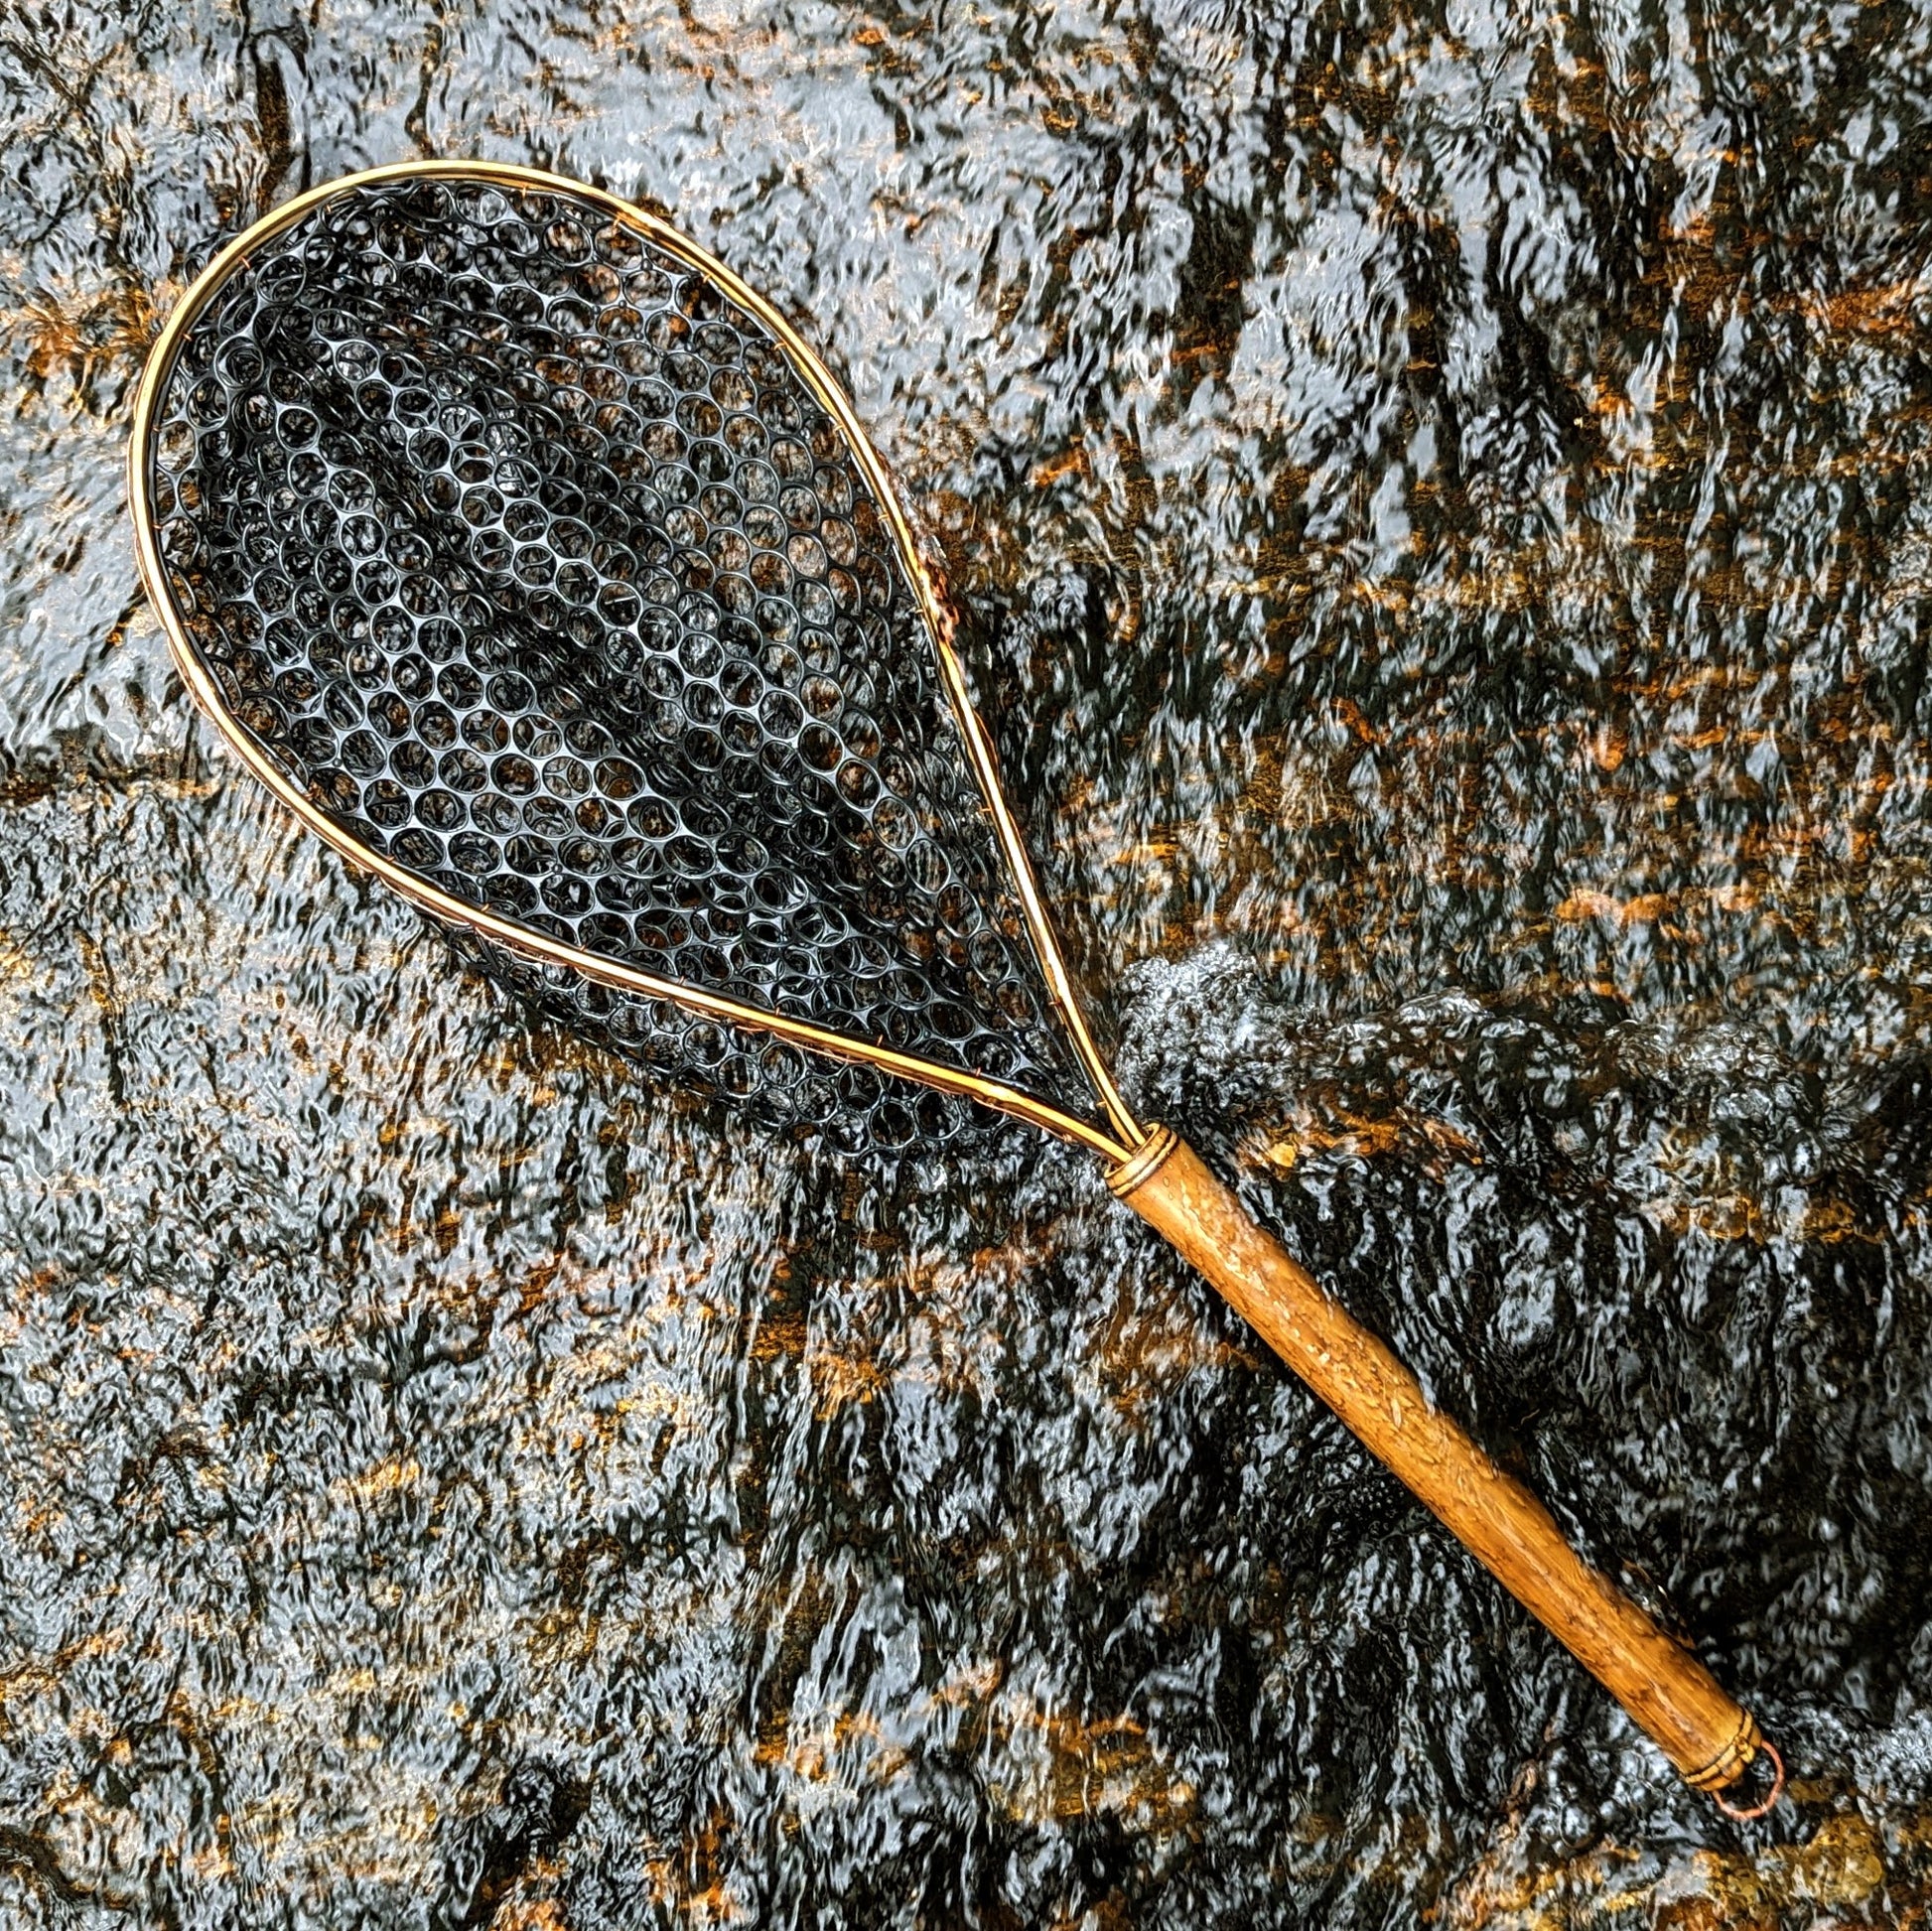 A bamboo fly fishing net lying on a rock in the water on the river in Western North Carolina. The rubber net basket is smooth and shiny and protects the fish for catch and release. The handle is flame cured for strength and durability and there is copper stitching and a copper keeper ring to attach your net keeper to.